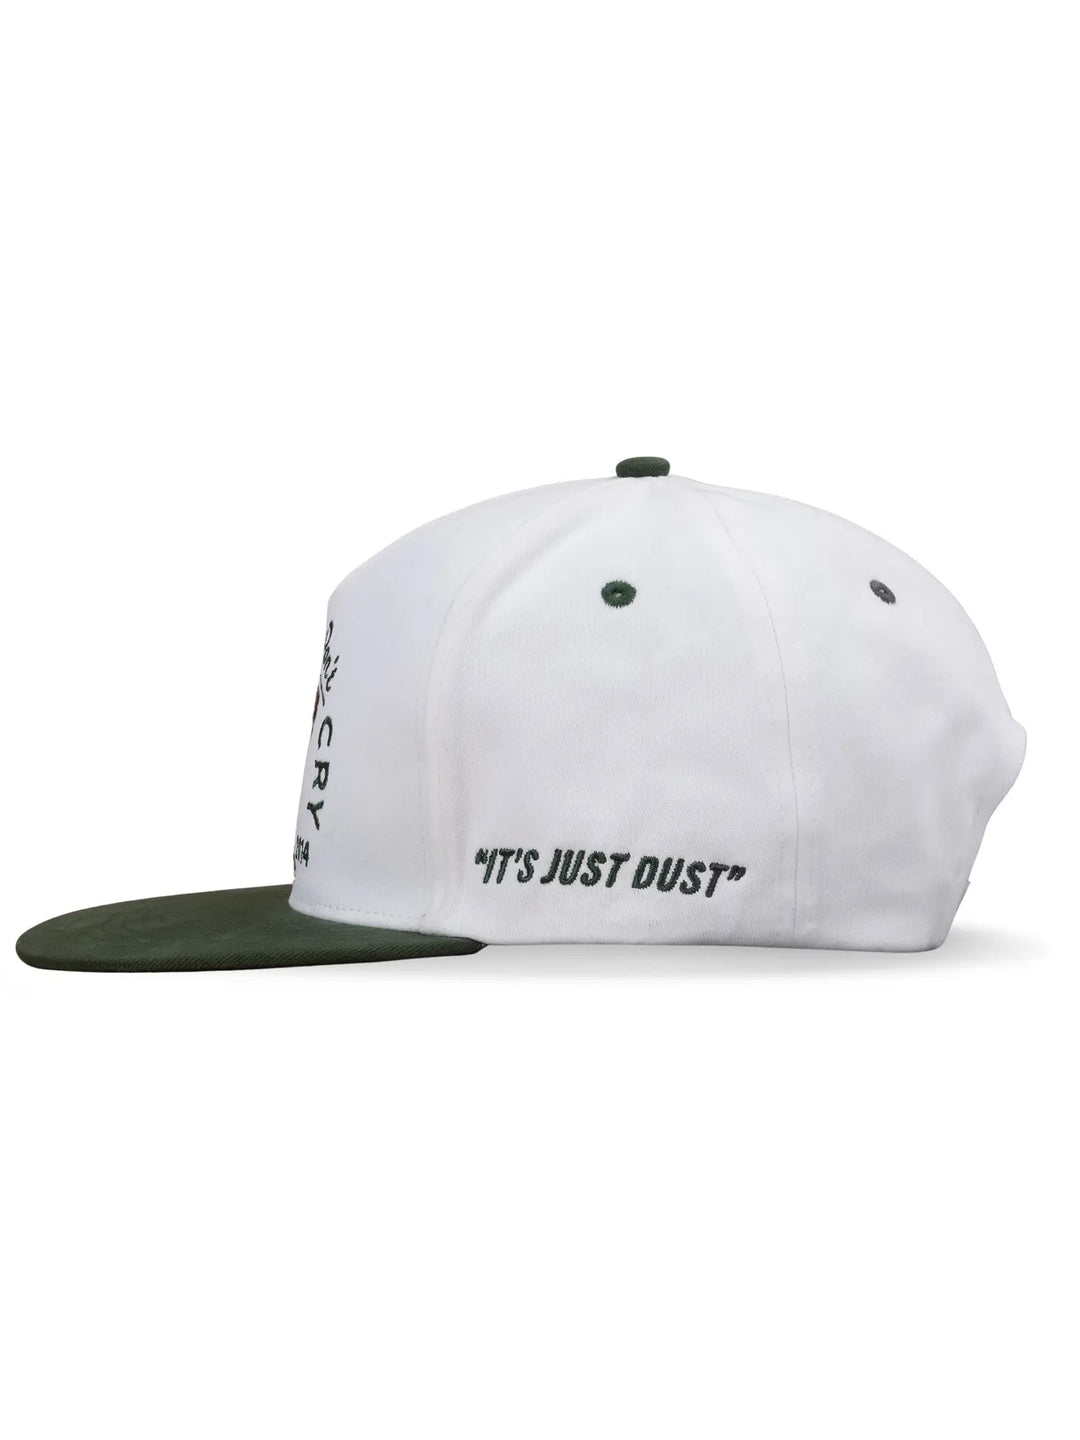 Cowboys Don'T Cry Hat